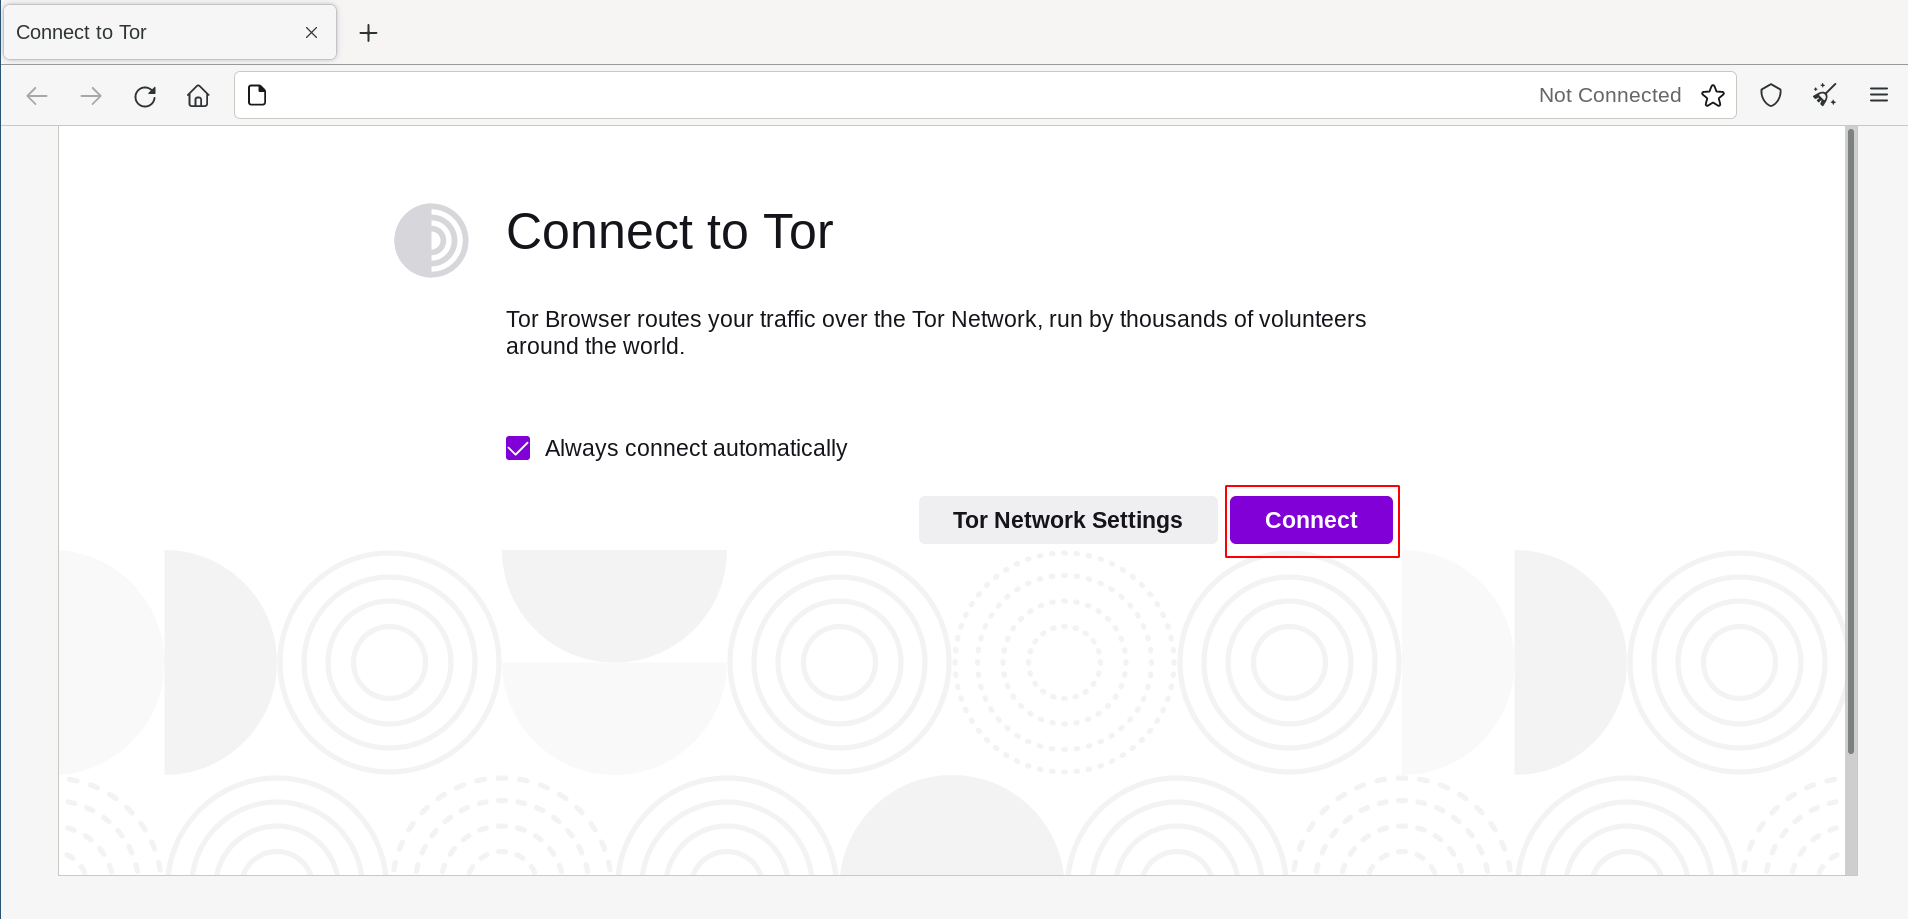 Click 'Connect' to connect to Tor.